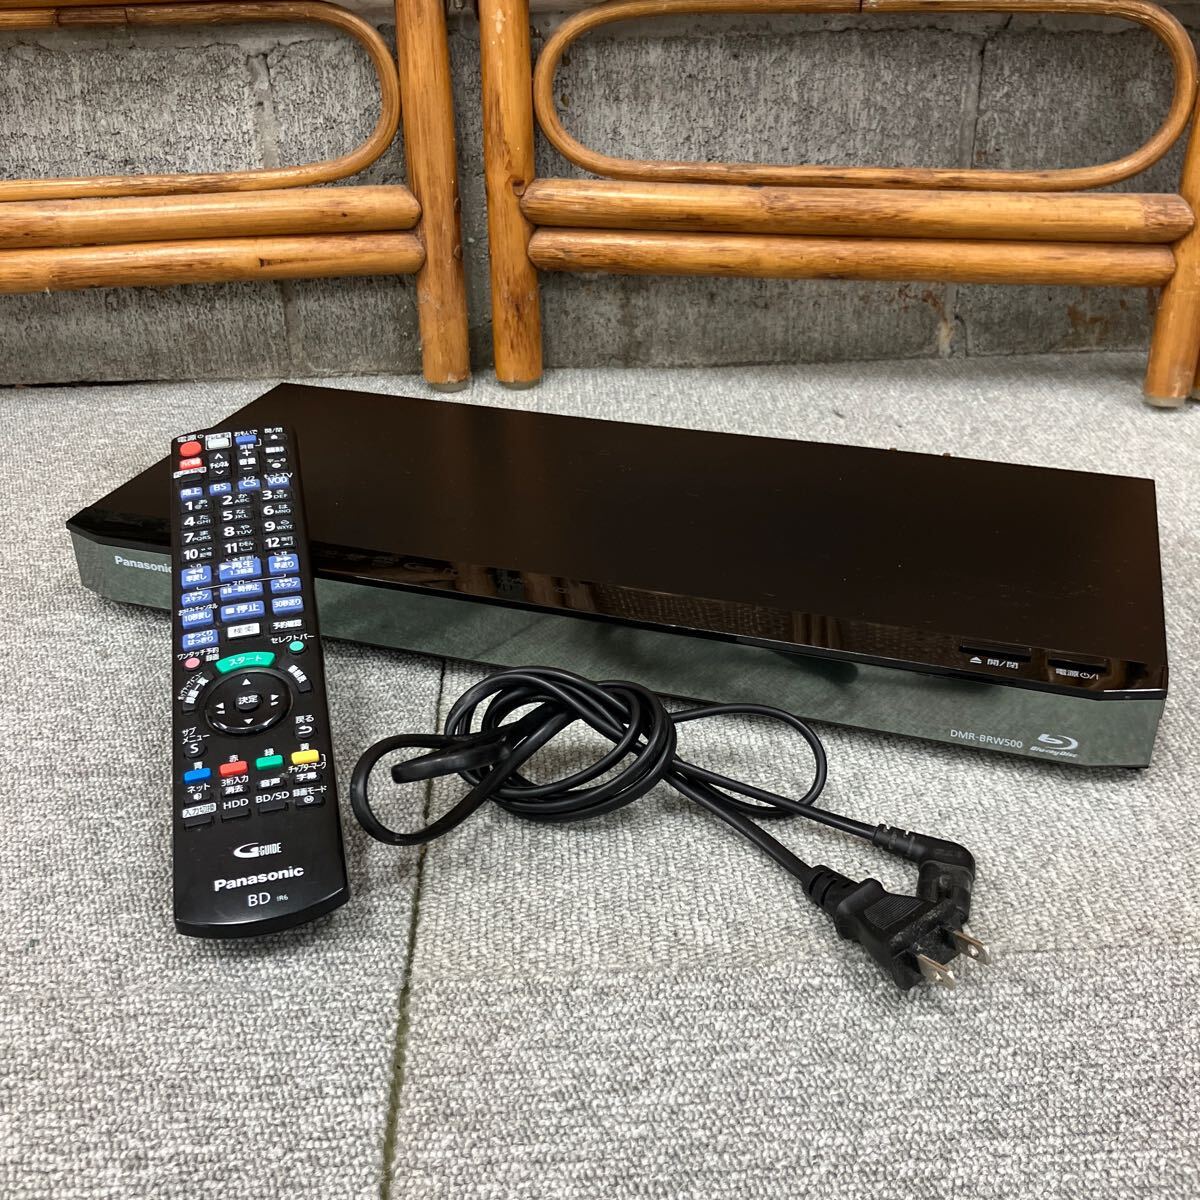 *[ selling out ]Panasonic Panasonic DIGA BLU-RAY DISC RECORDER Blue-ray disk recorder DMR-BRW500 remote control attaching . operation verification ending 